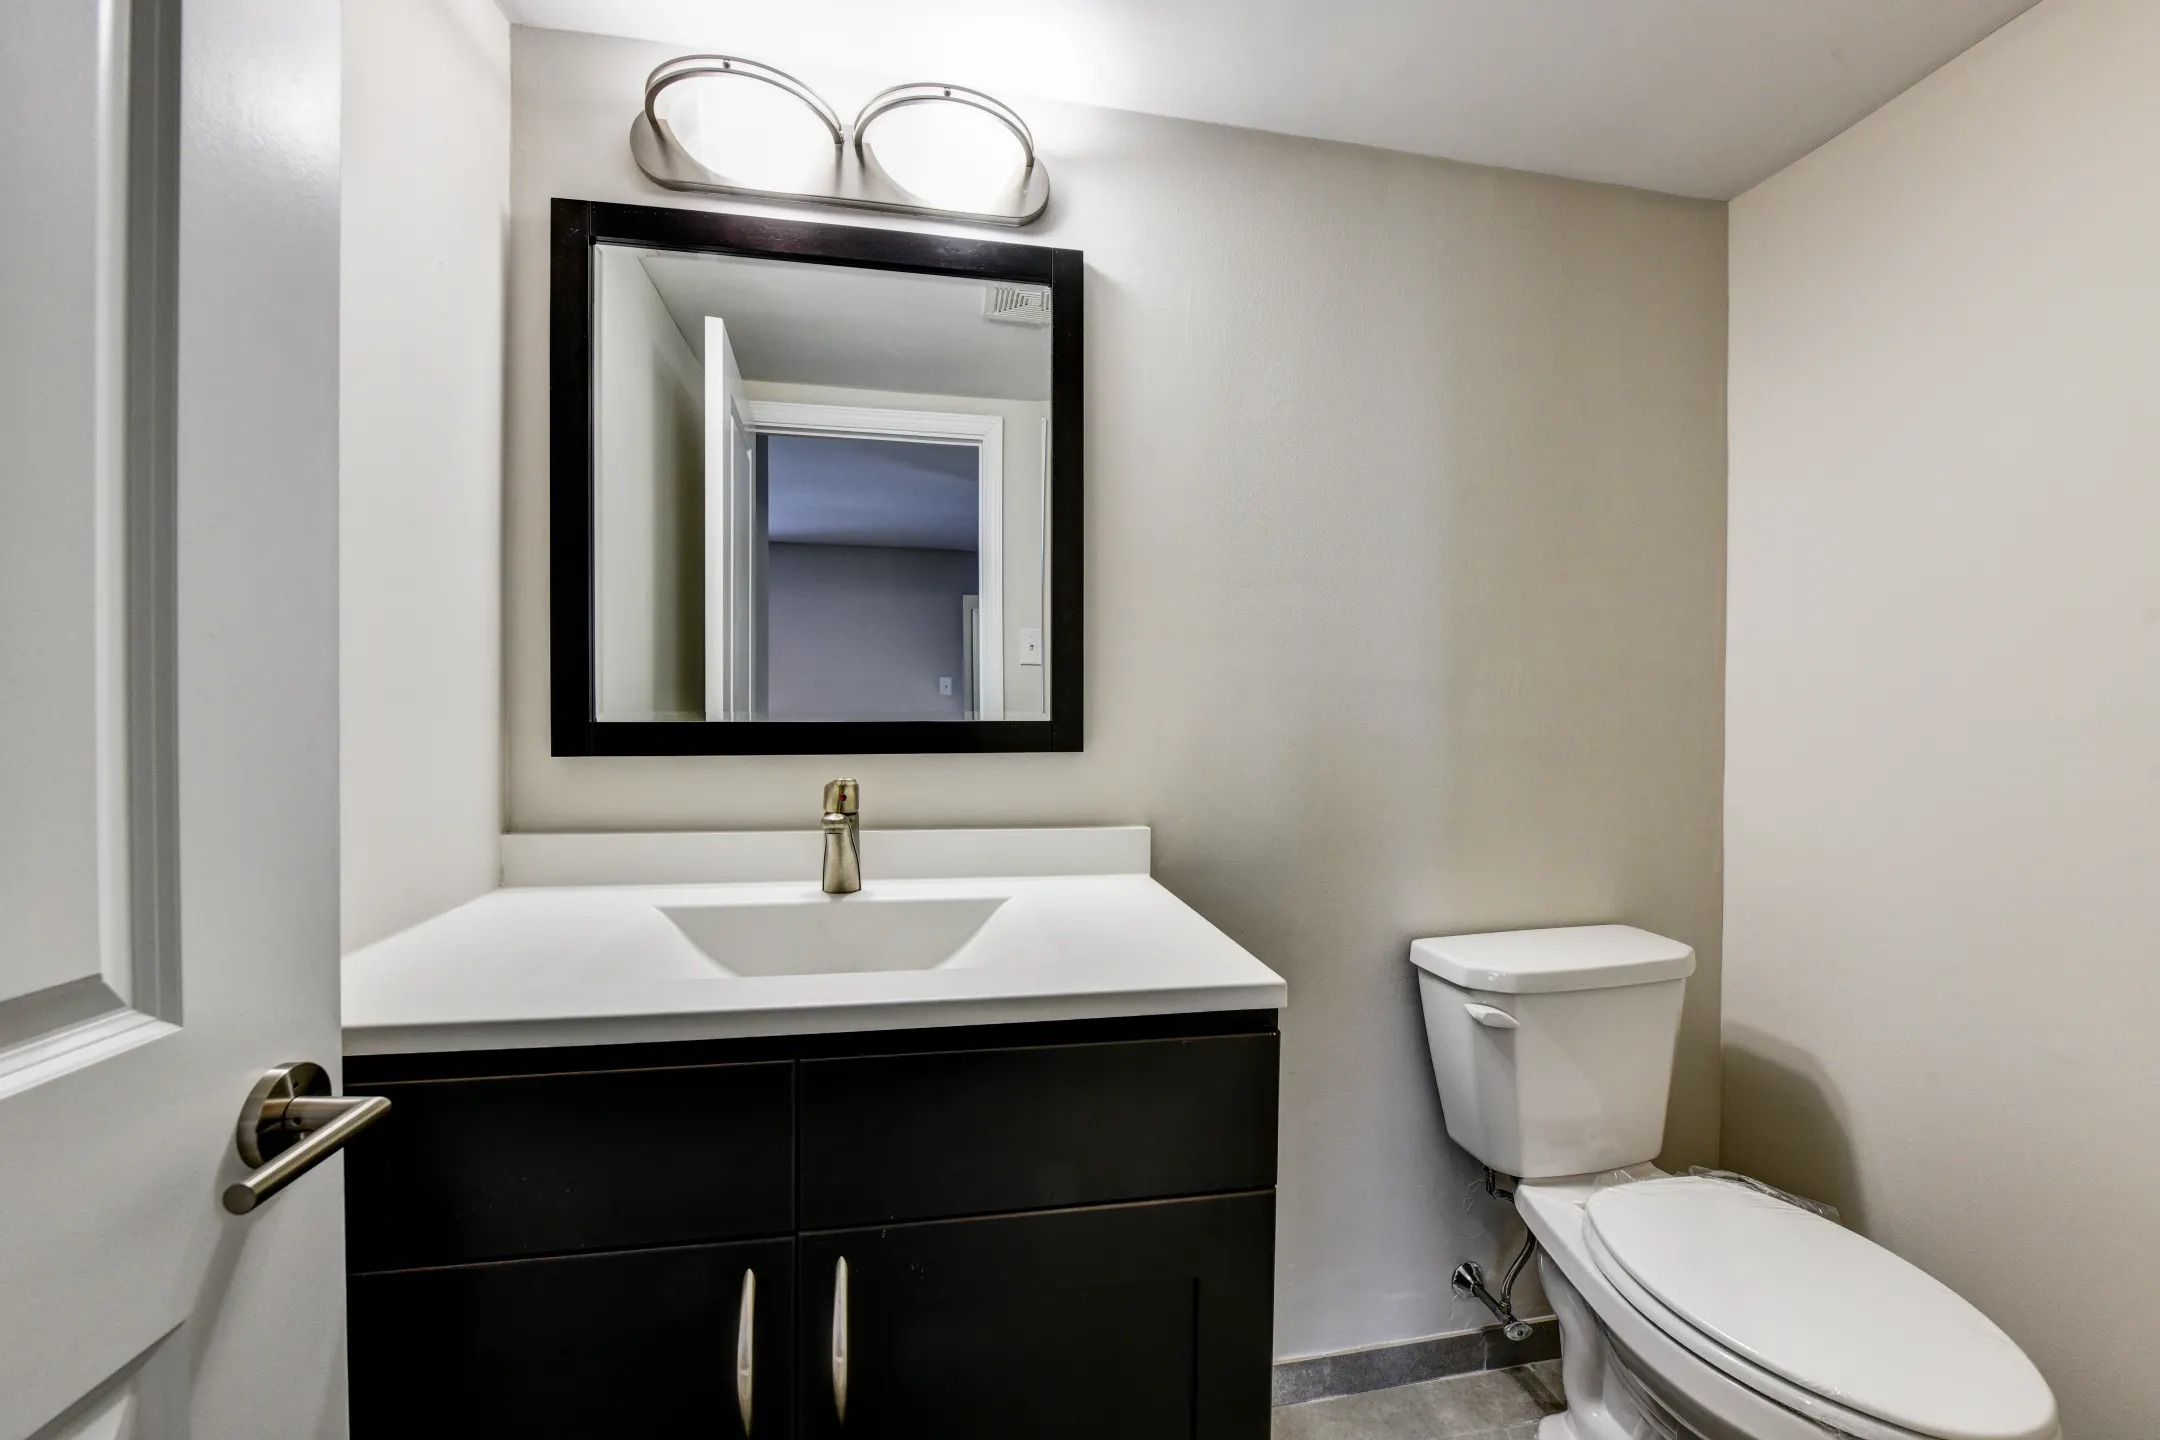 Bathroom - Townline Townhomes - Blue Bell, PA